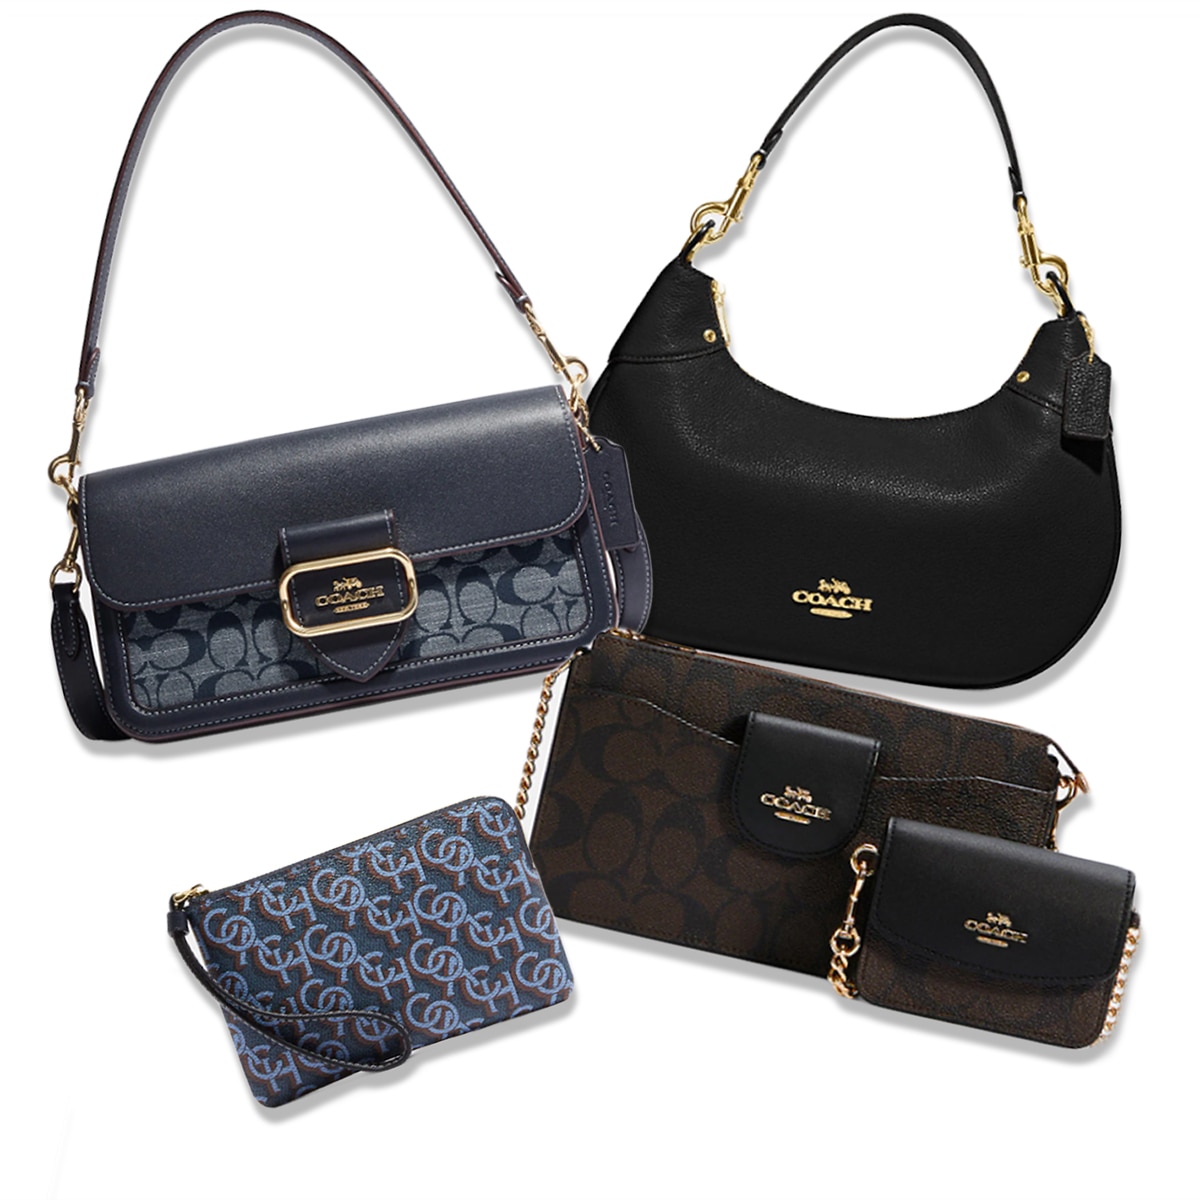 Black Friday 2021: Shop Coach purses for up to 70% off